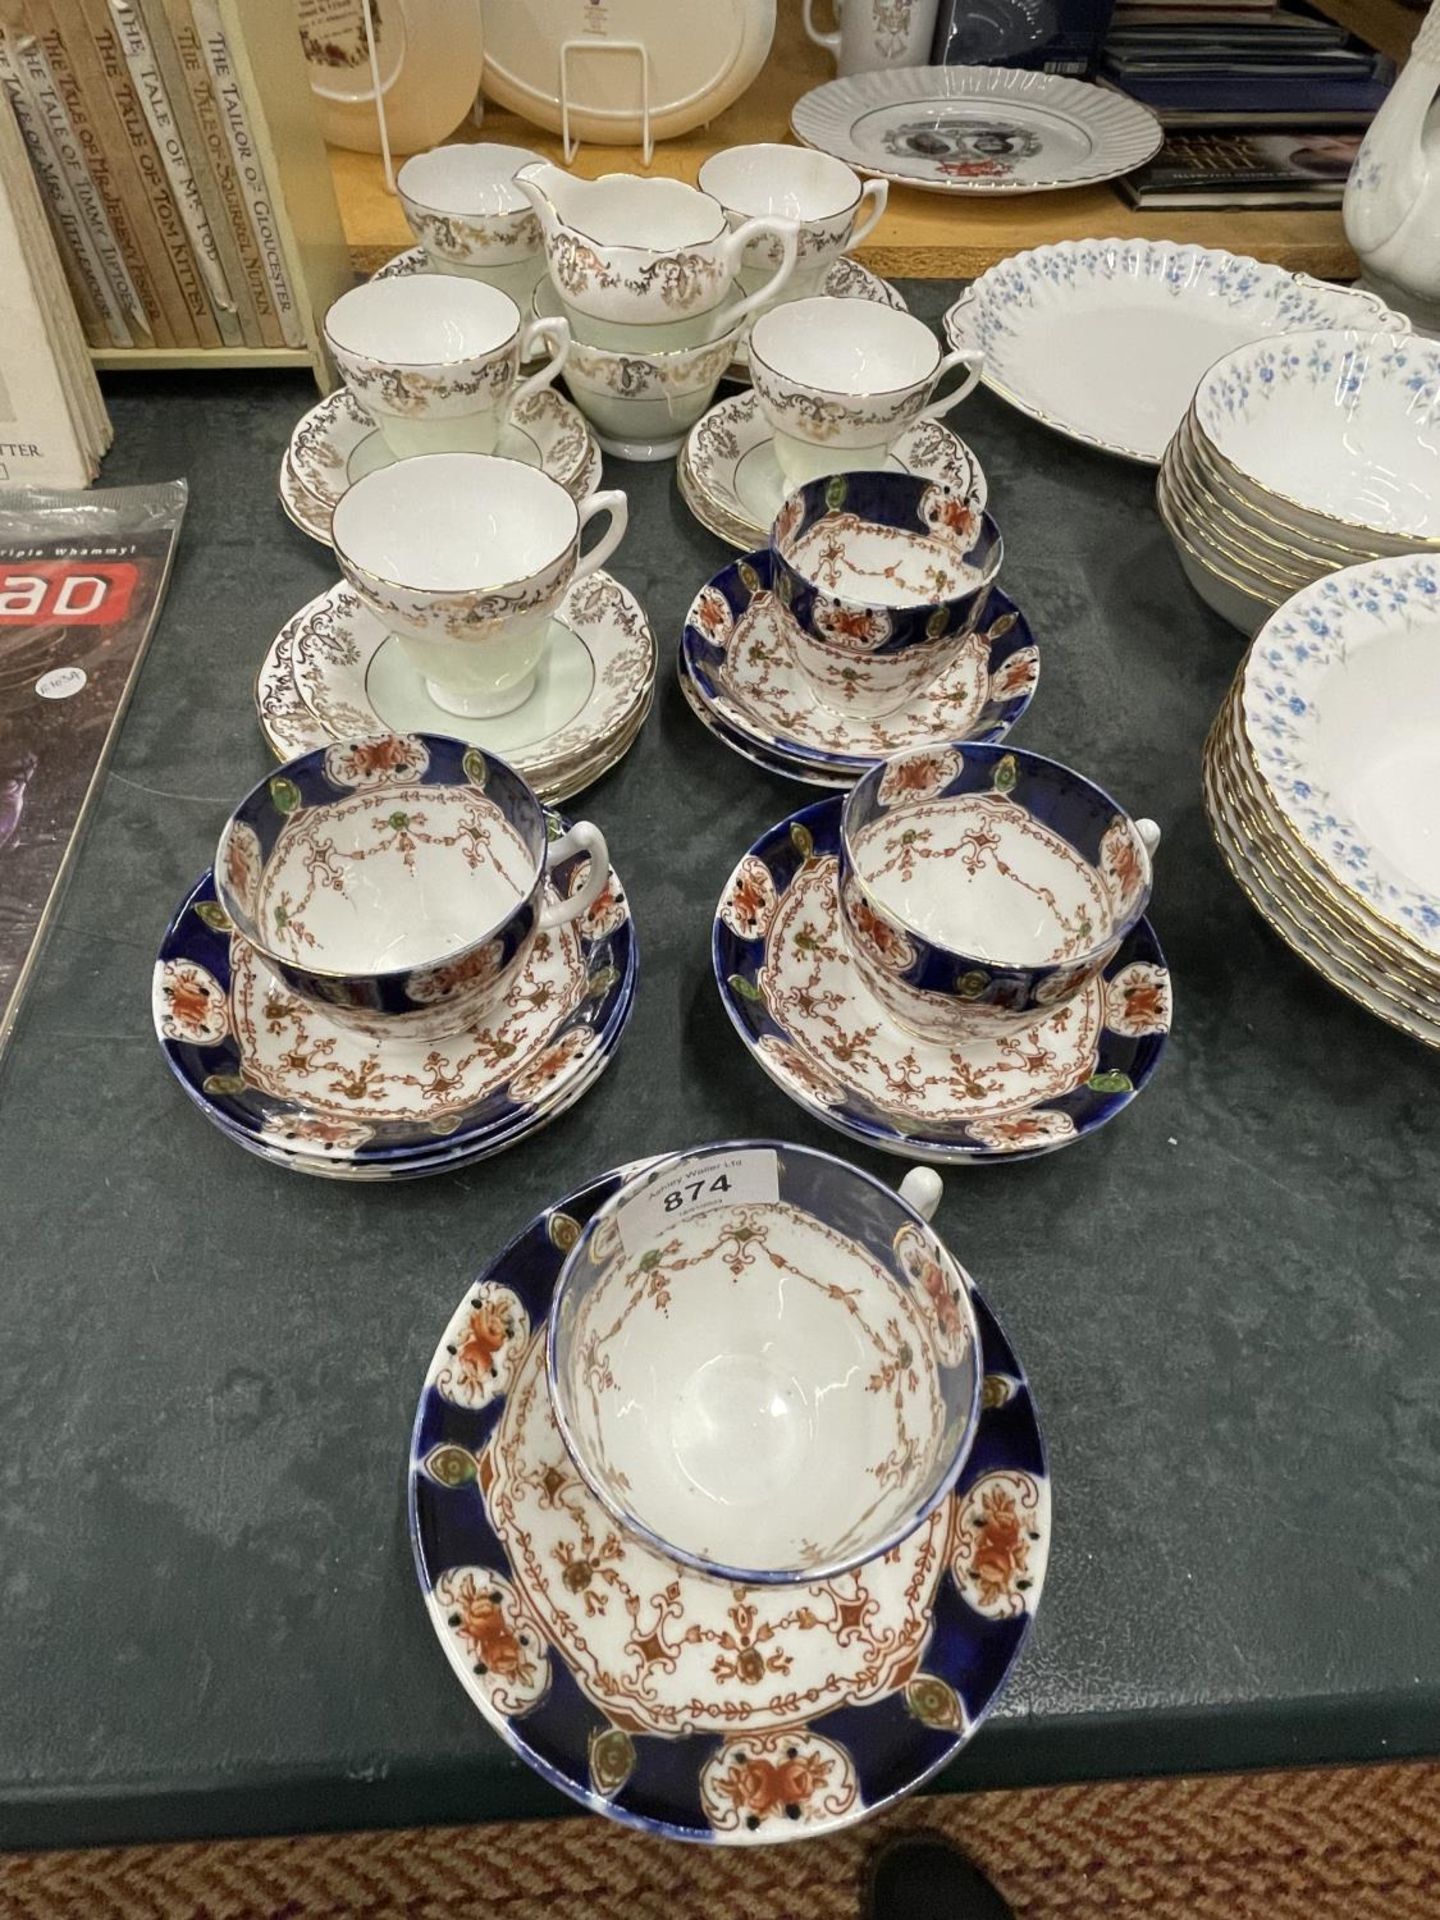 AN ANTIQUE STANLEY & CO "CITY" PART TEASET TOGETHER WITH A SUTHERLAND CHINA TEASET